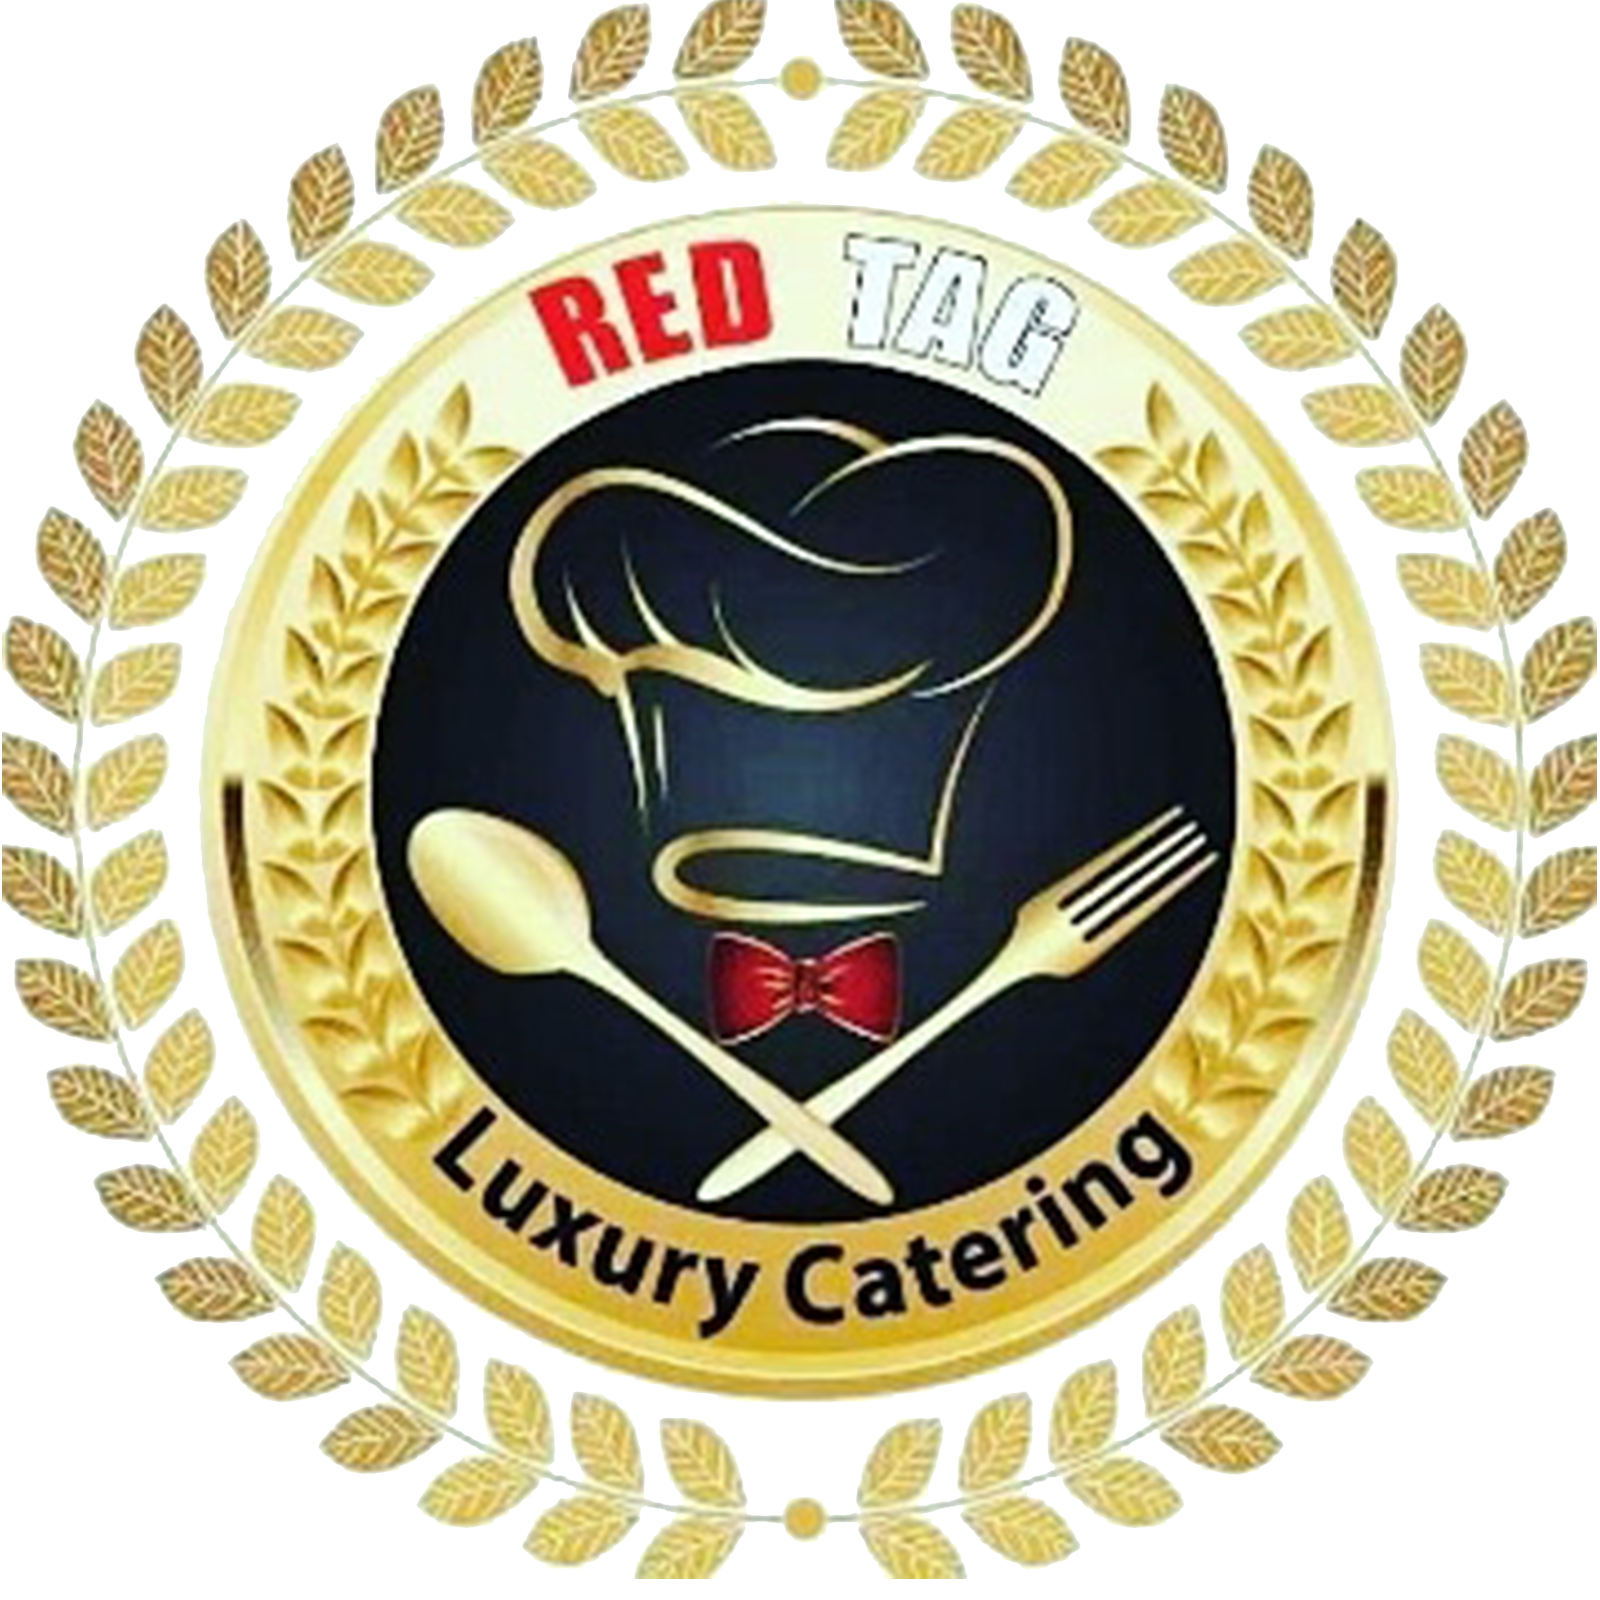 Red Tag Caterers Logo 